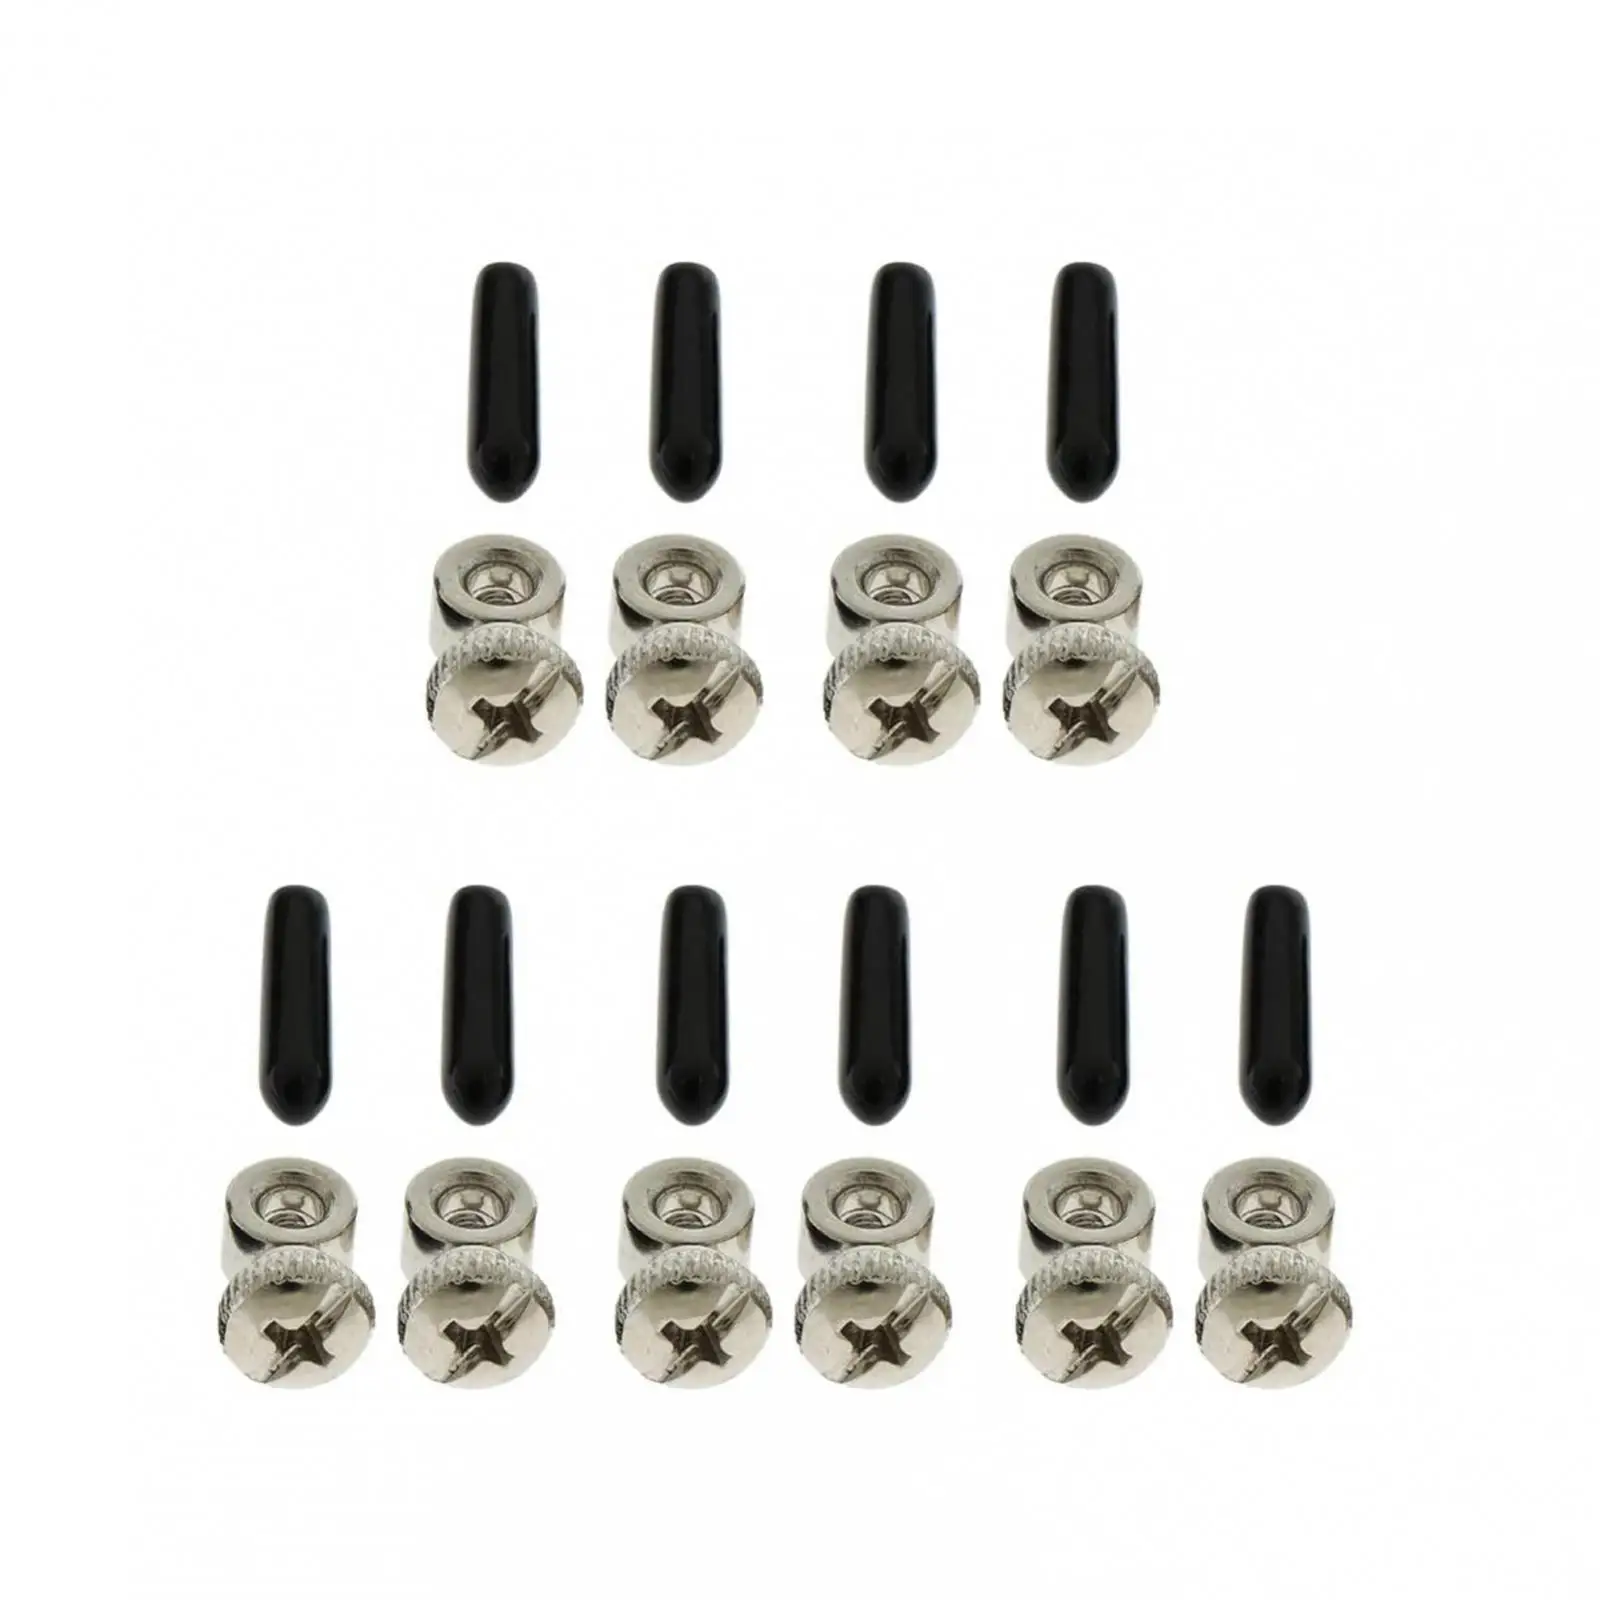 5 Sets Premium Spare Screws & Black End Caps Cover Collar and Adjusters for 